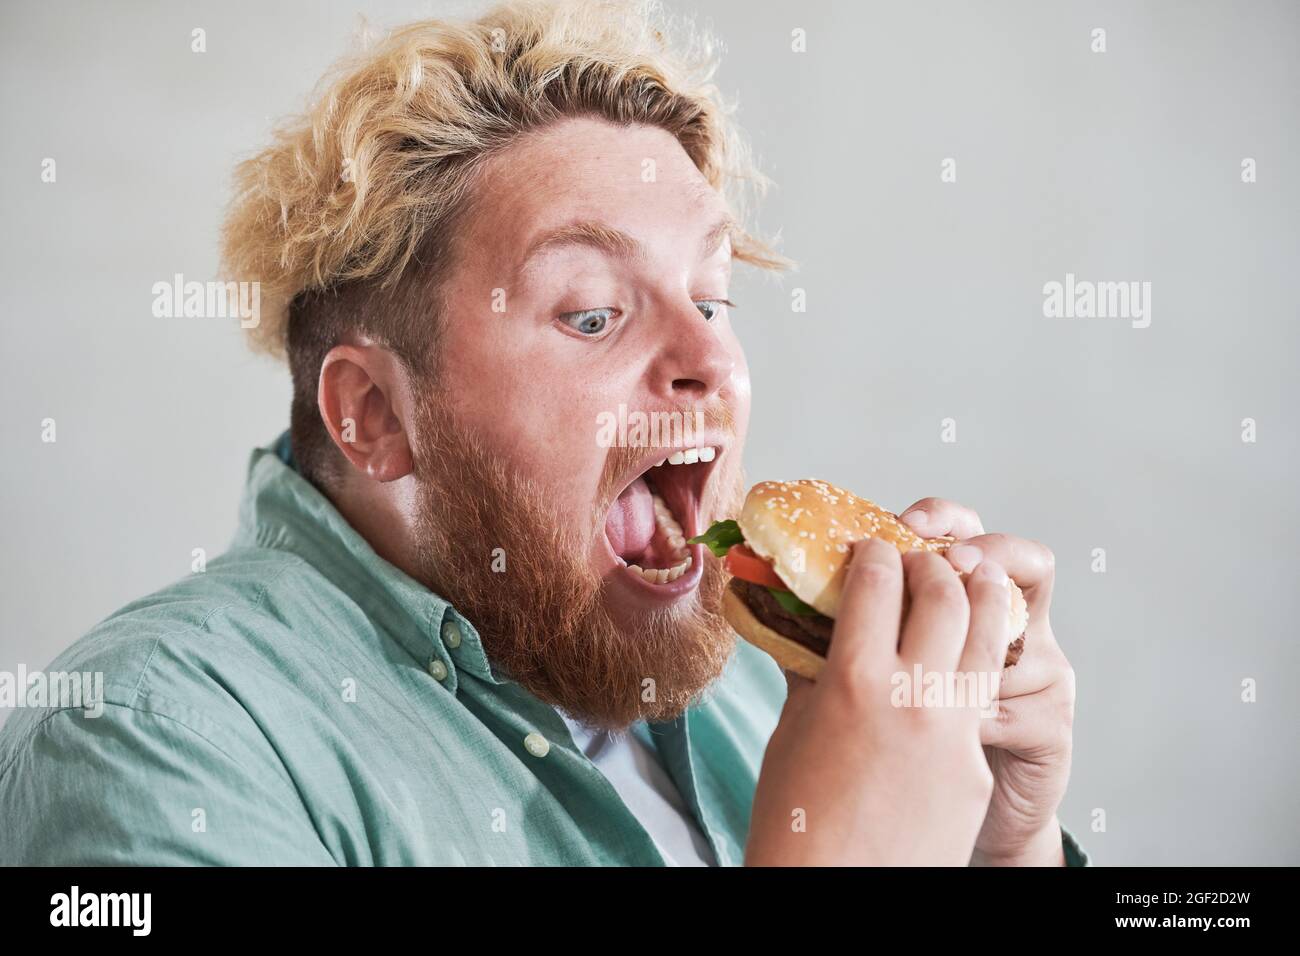 Close-up of overweight man opening his mouth and eating big burger with pleasure isolated on white background Stock Photo